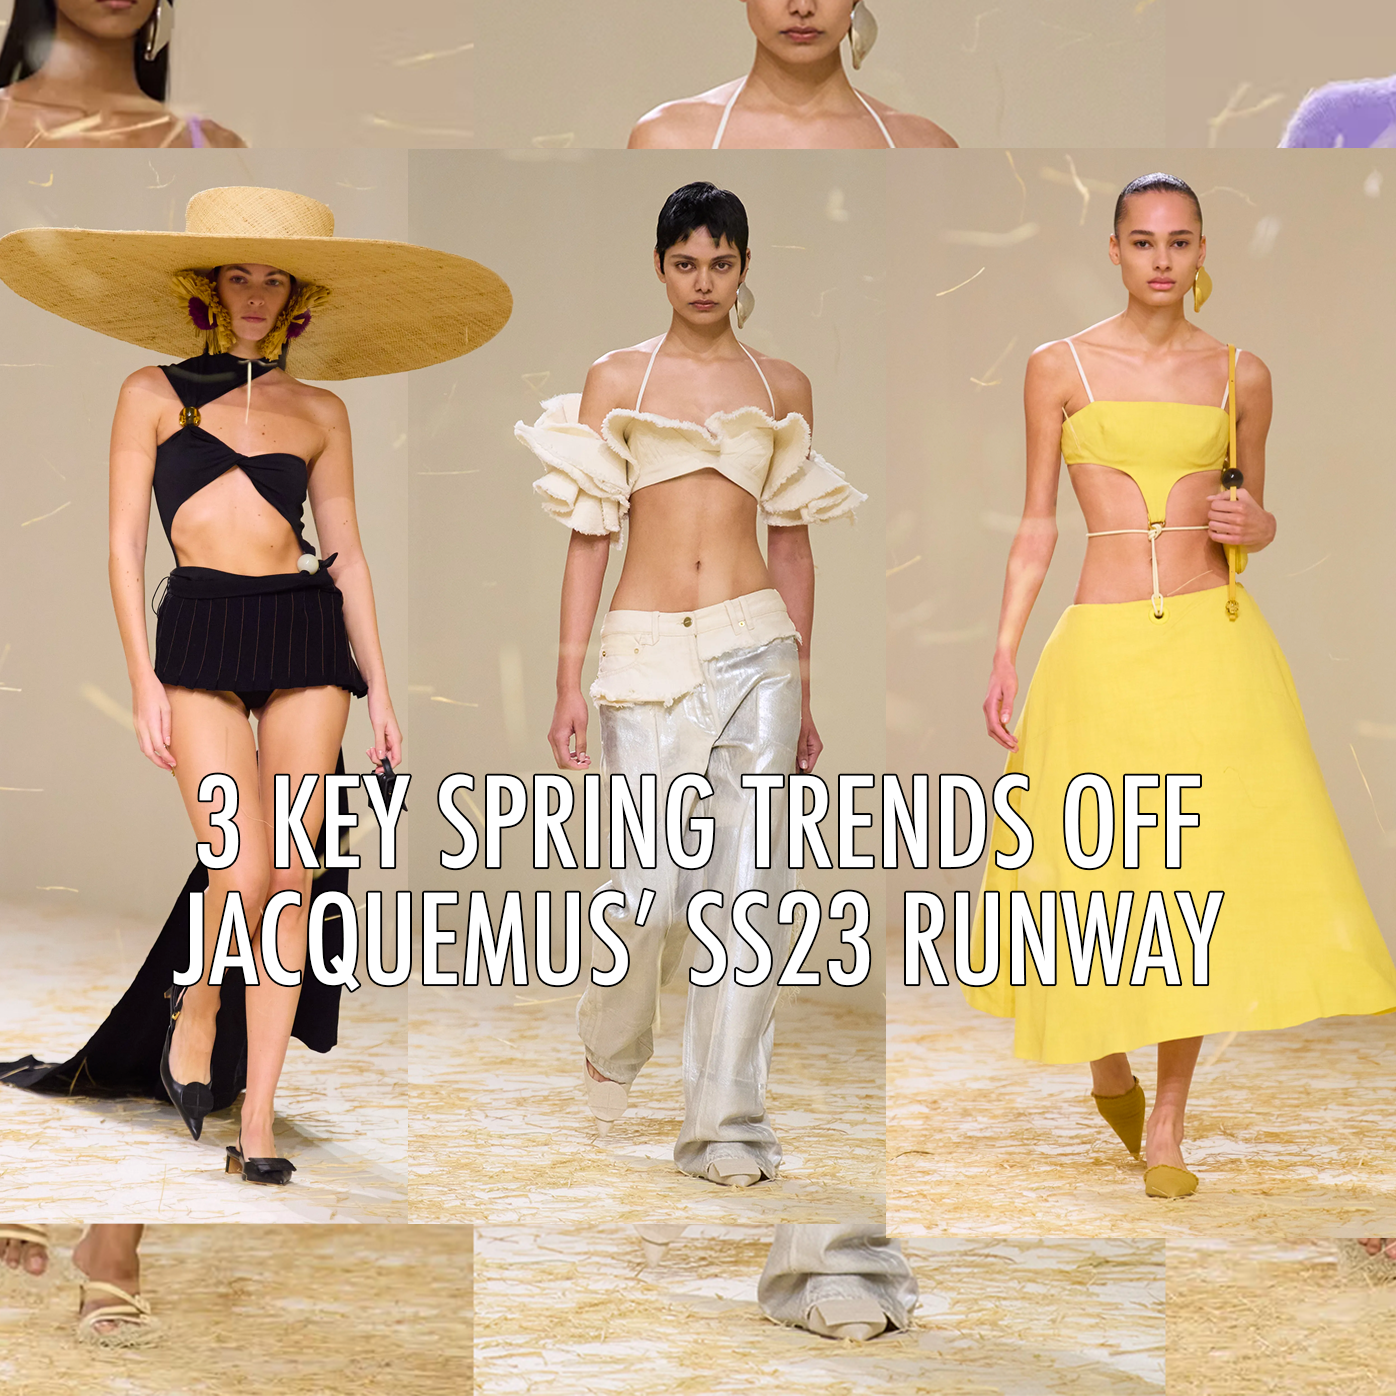 3 Key Spring Trends Off Jacquemus’ SS23 Runway